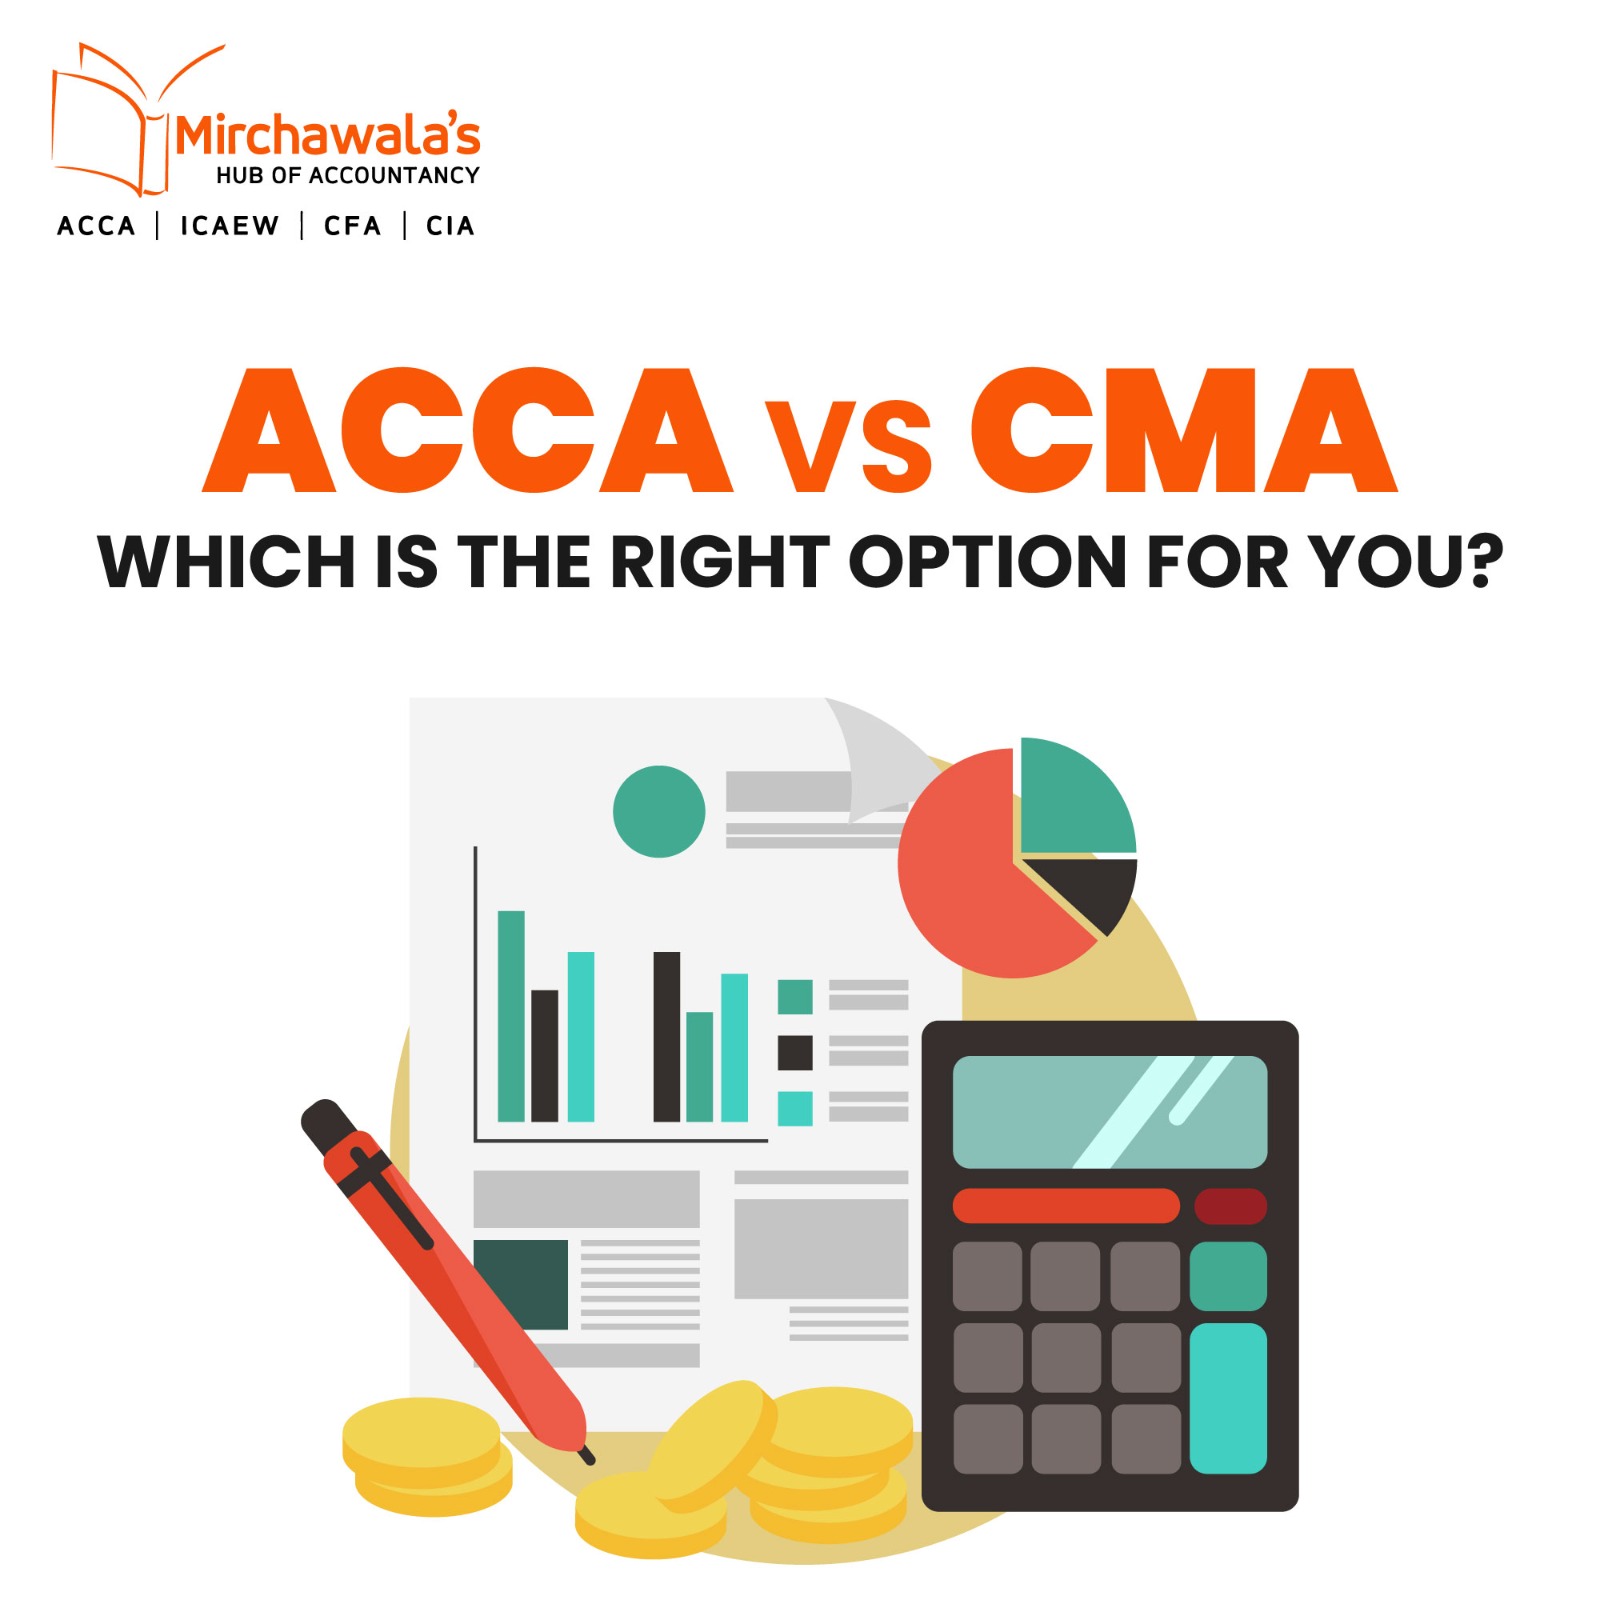 ACCA vs. CMA: Which is the Right Option for You?